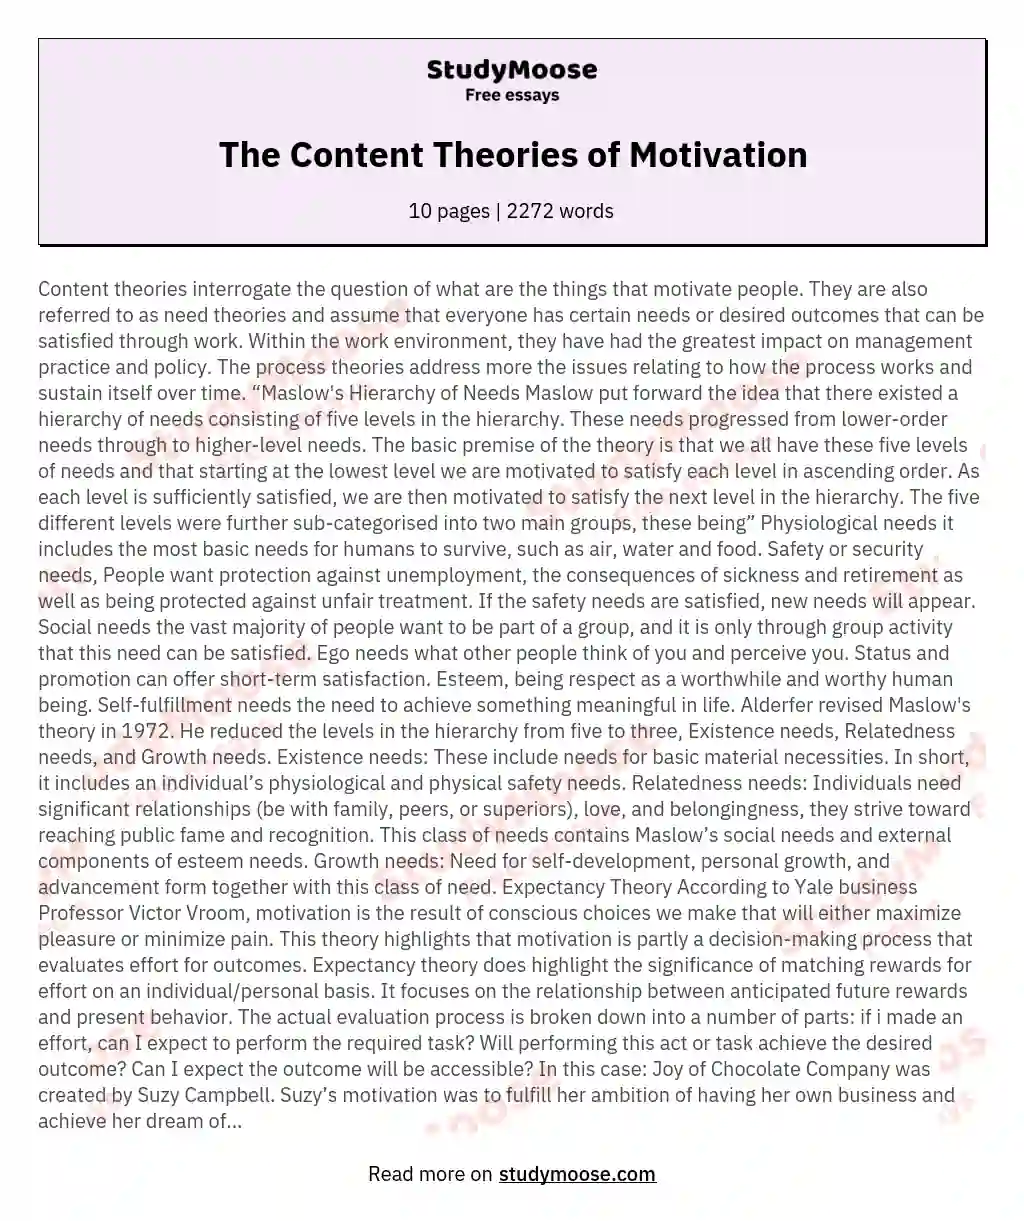 The Content Theories of Motivation